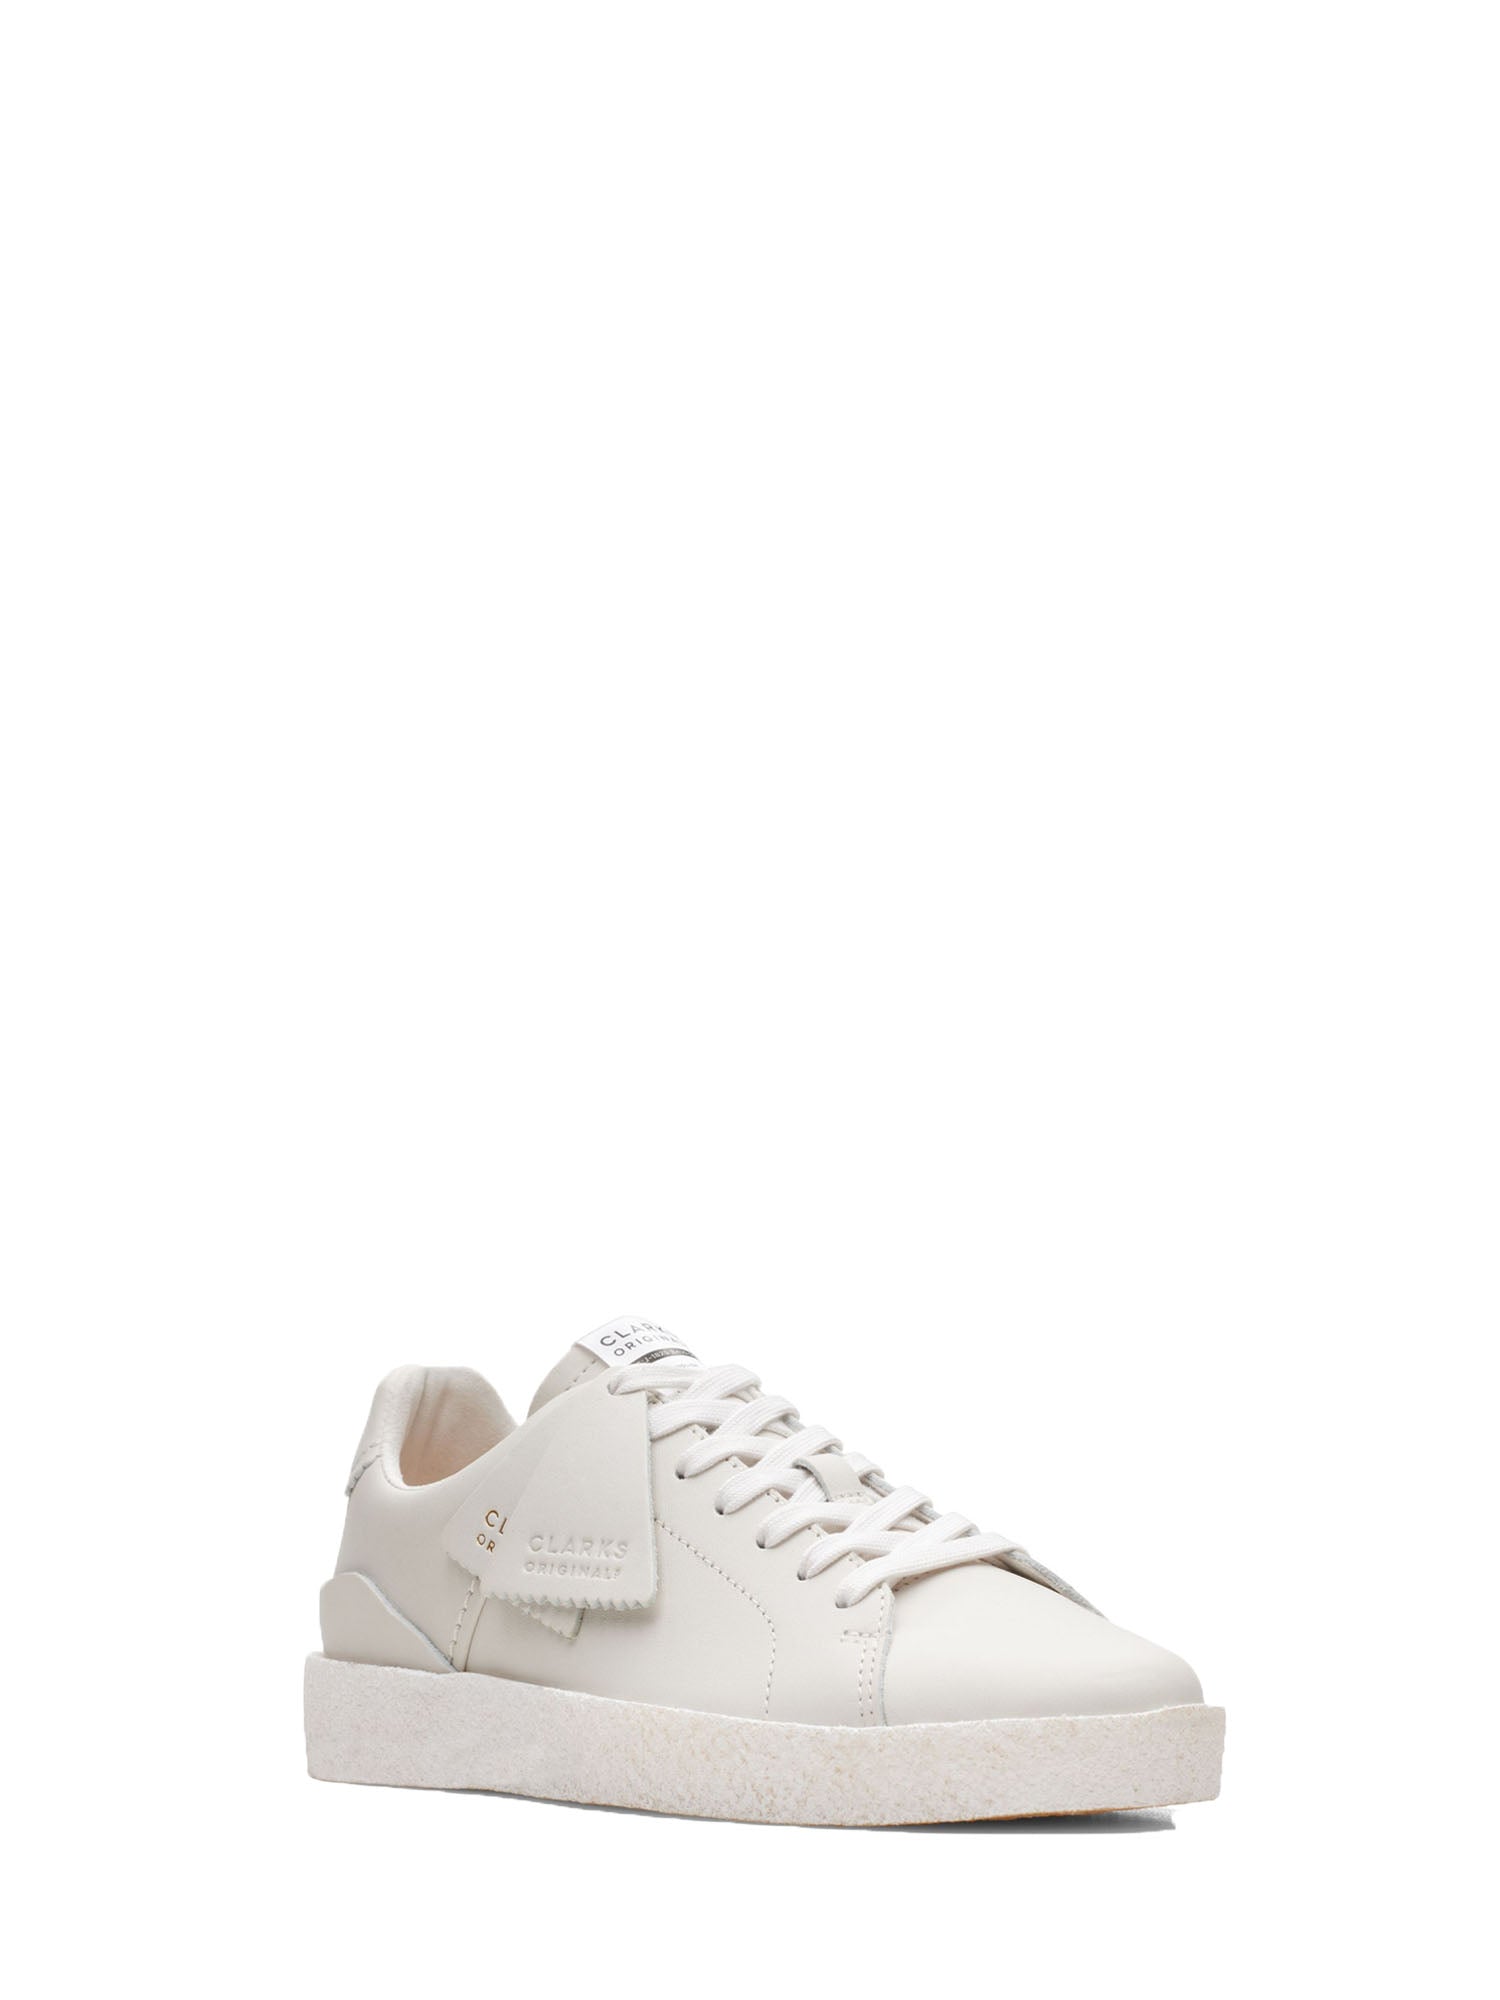 CLARKS SNEAKERS TORMATCH WHITE LEATHER